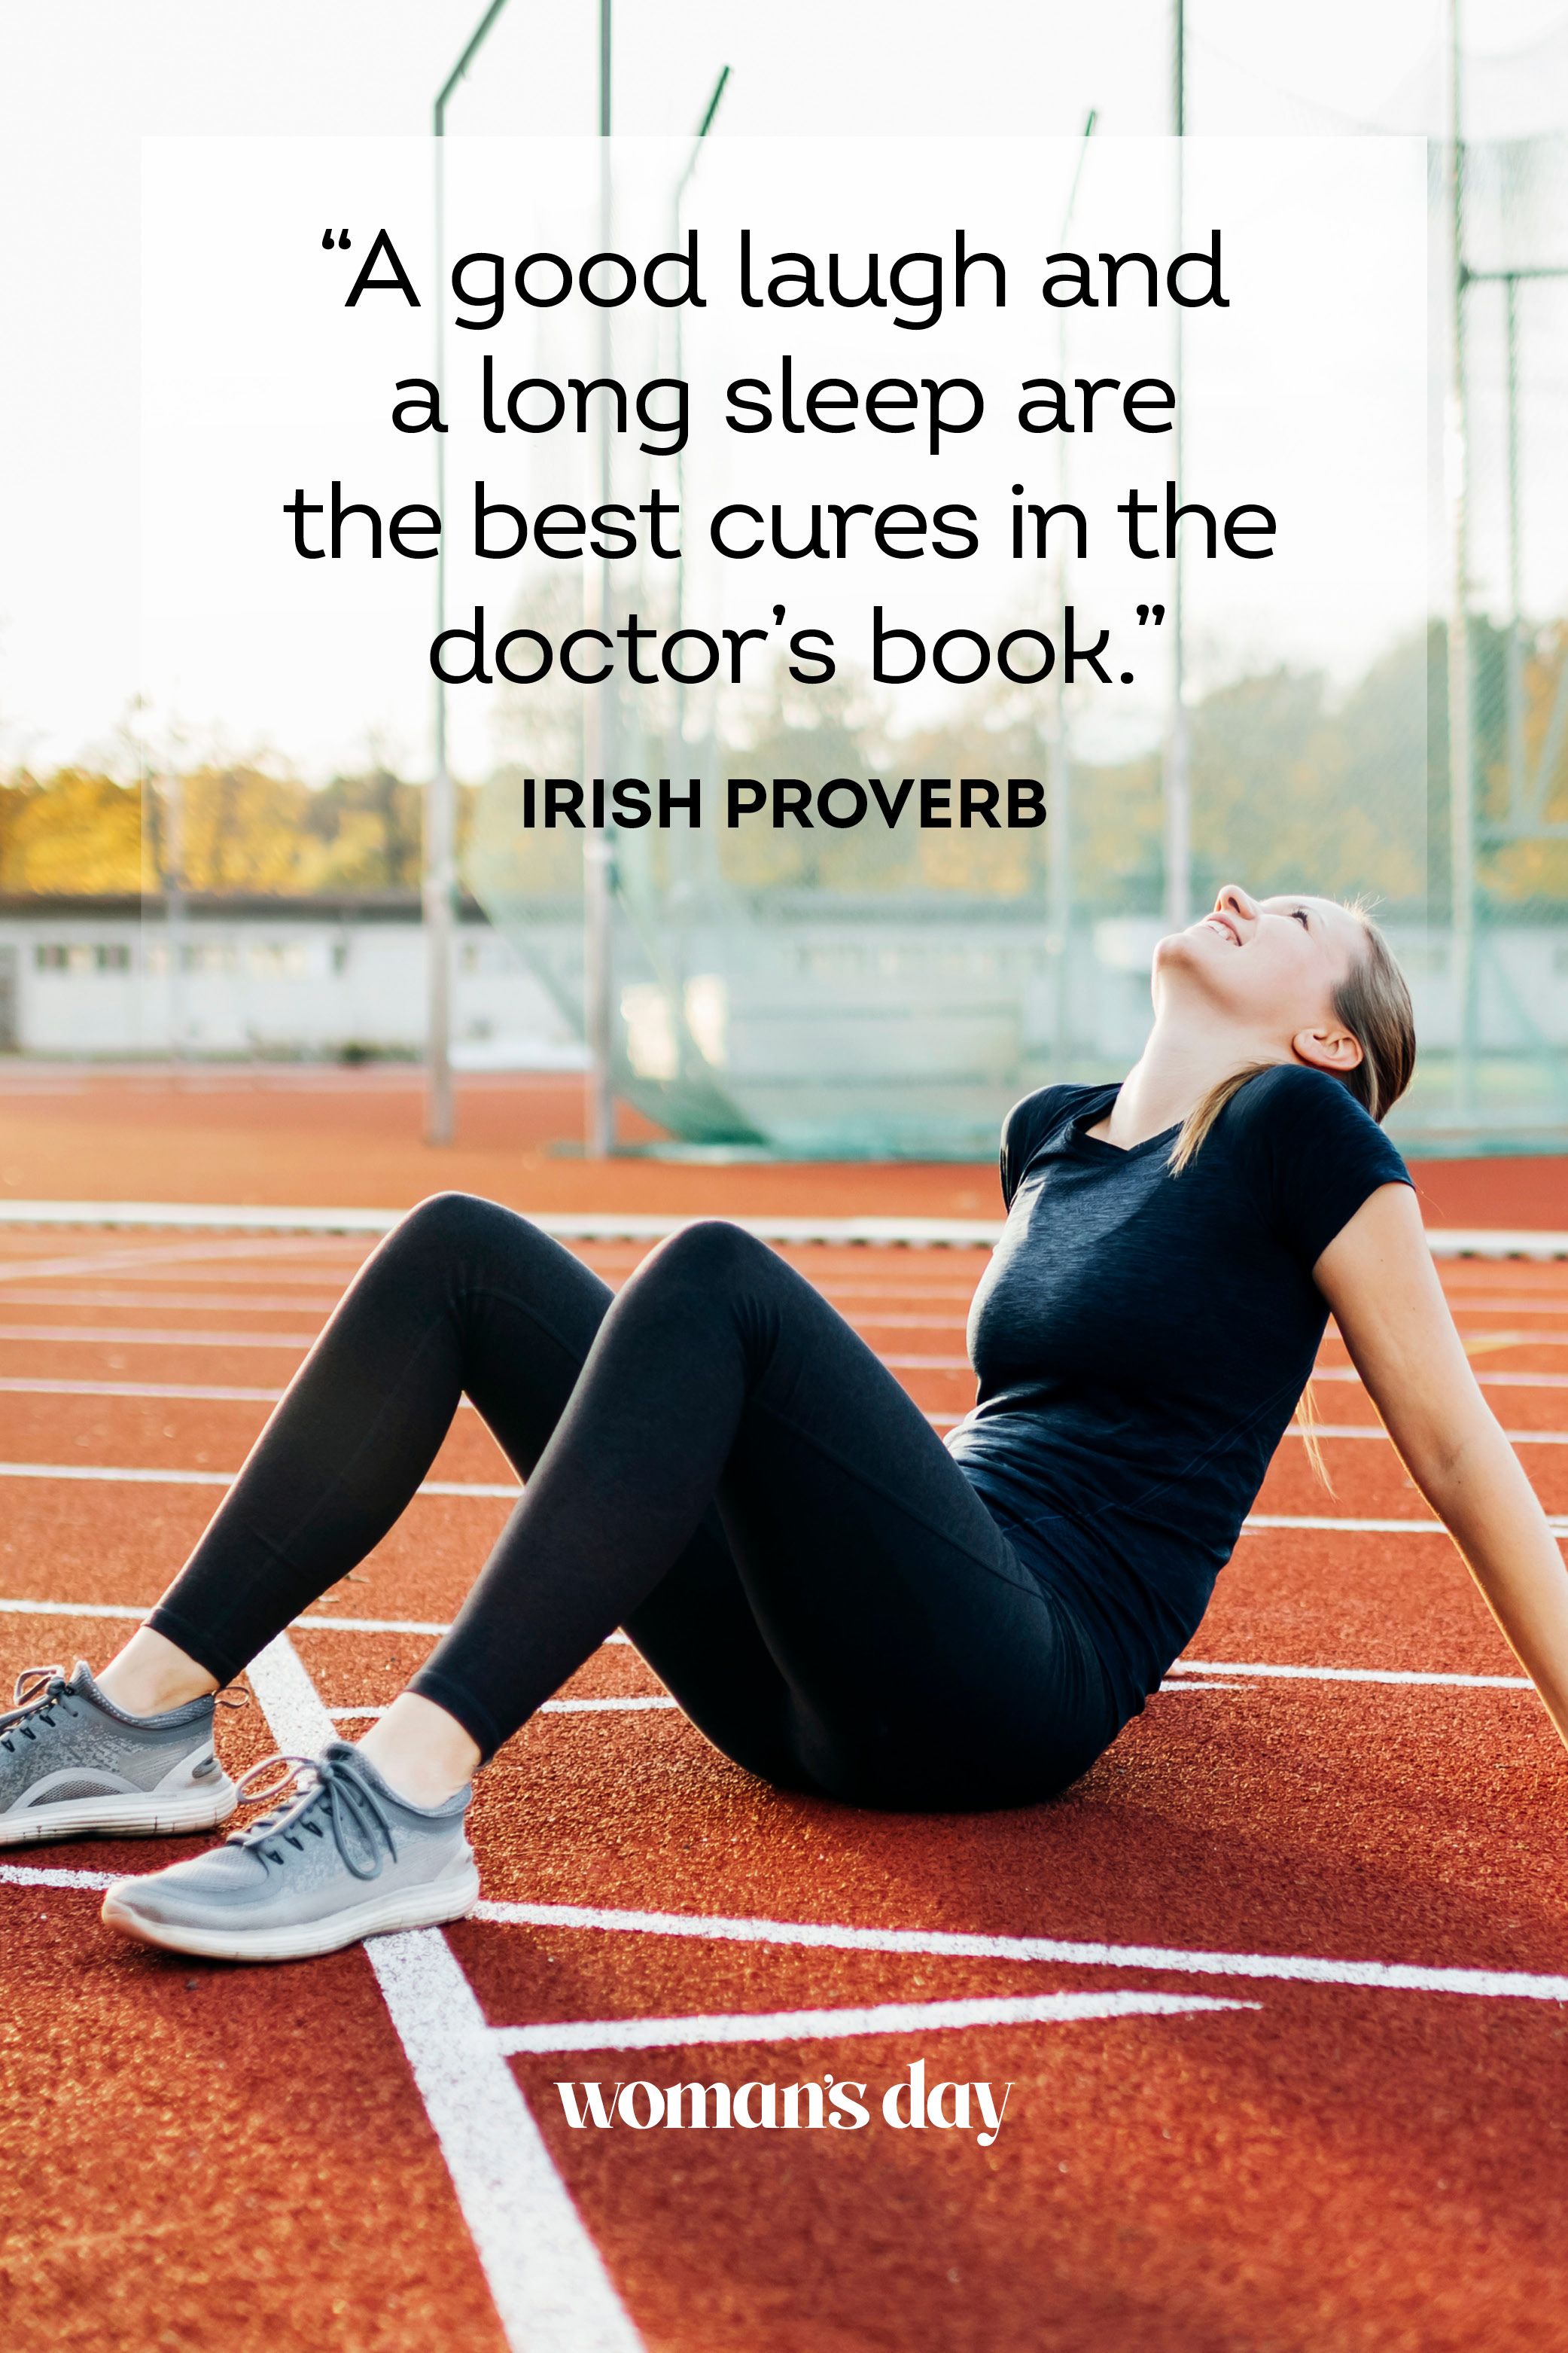 101 Best Health and Fitness Quotes - Healthy Lifestyle Quotes